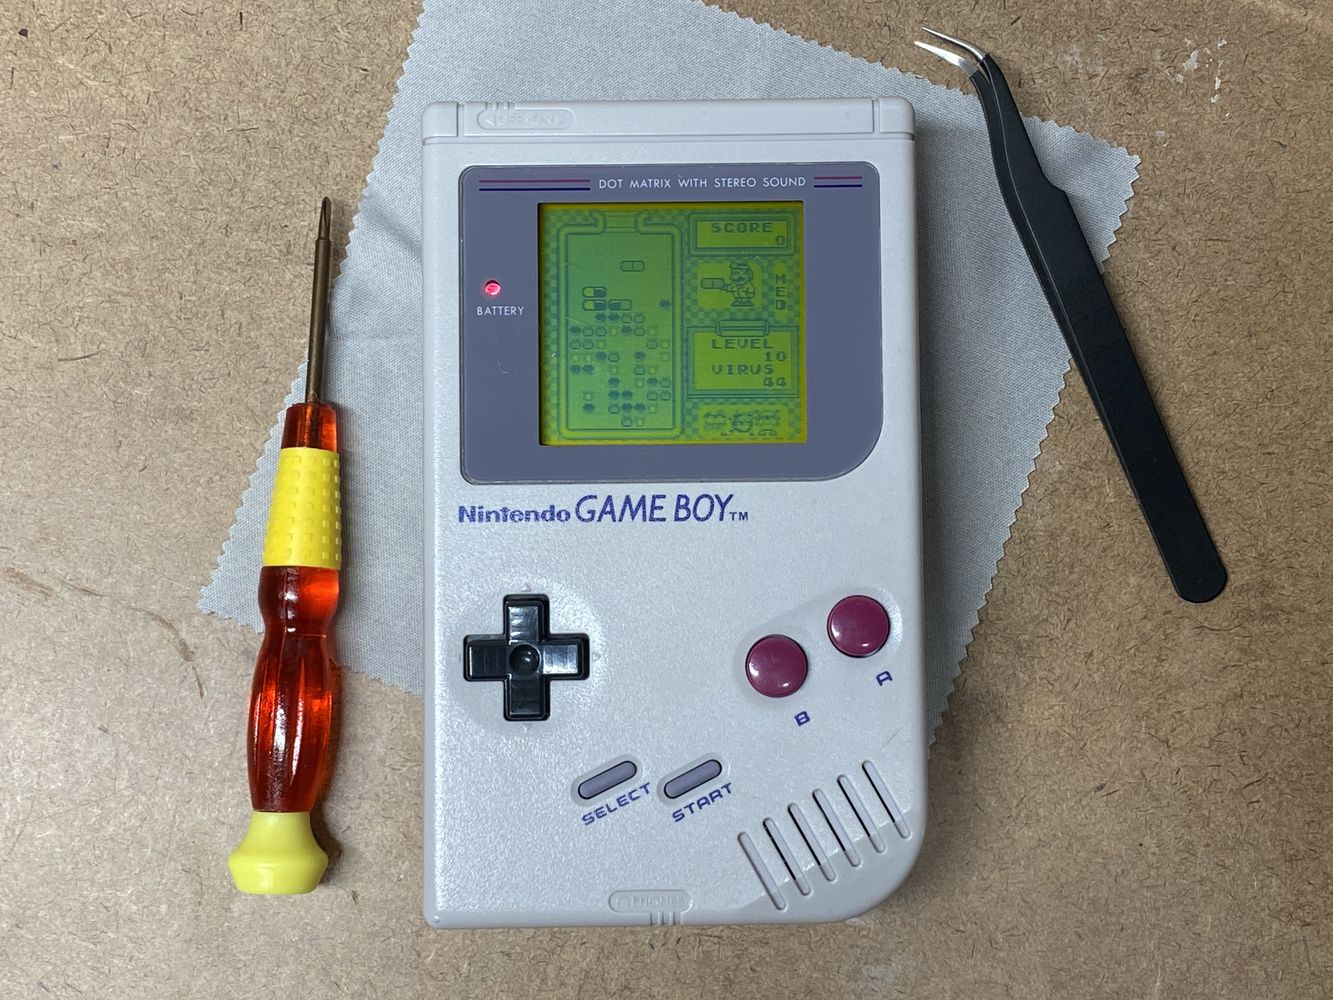 Game Boy showing Dr. Mario. System is on a workbench next to a screwdriver and tweezers